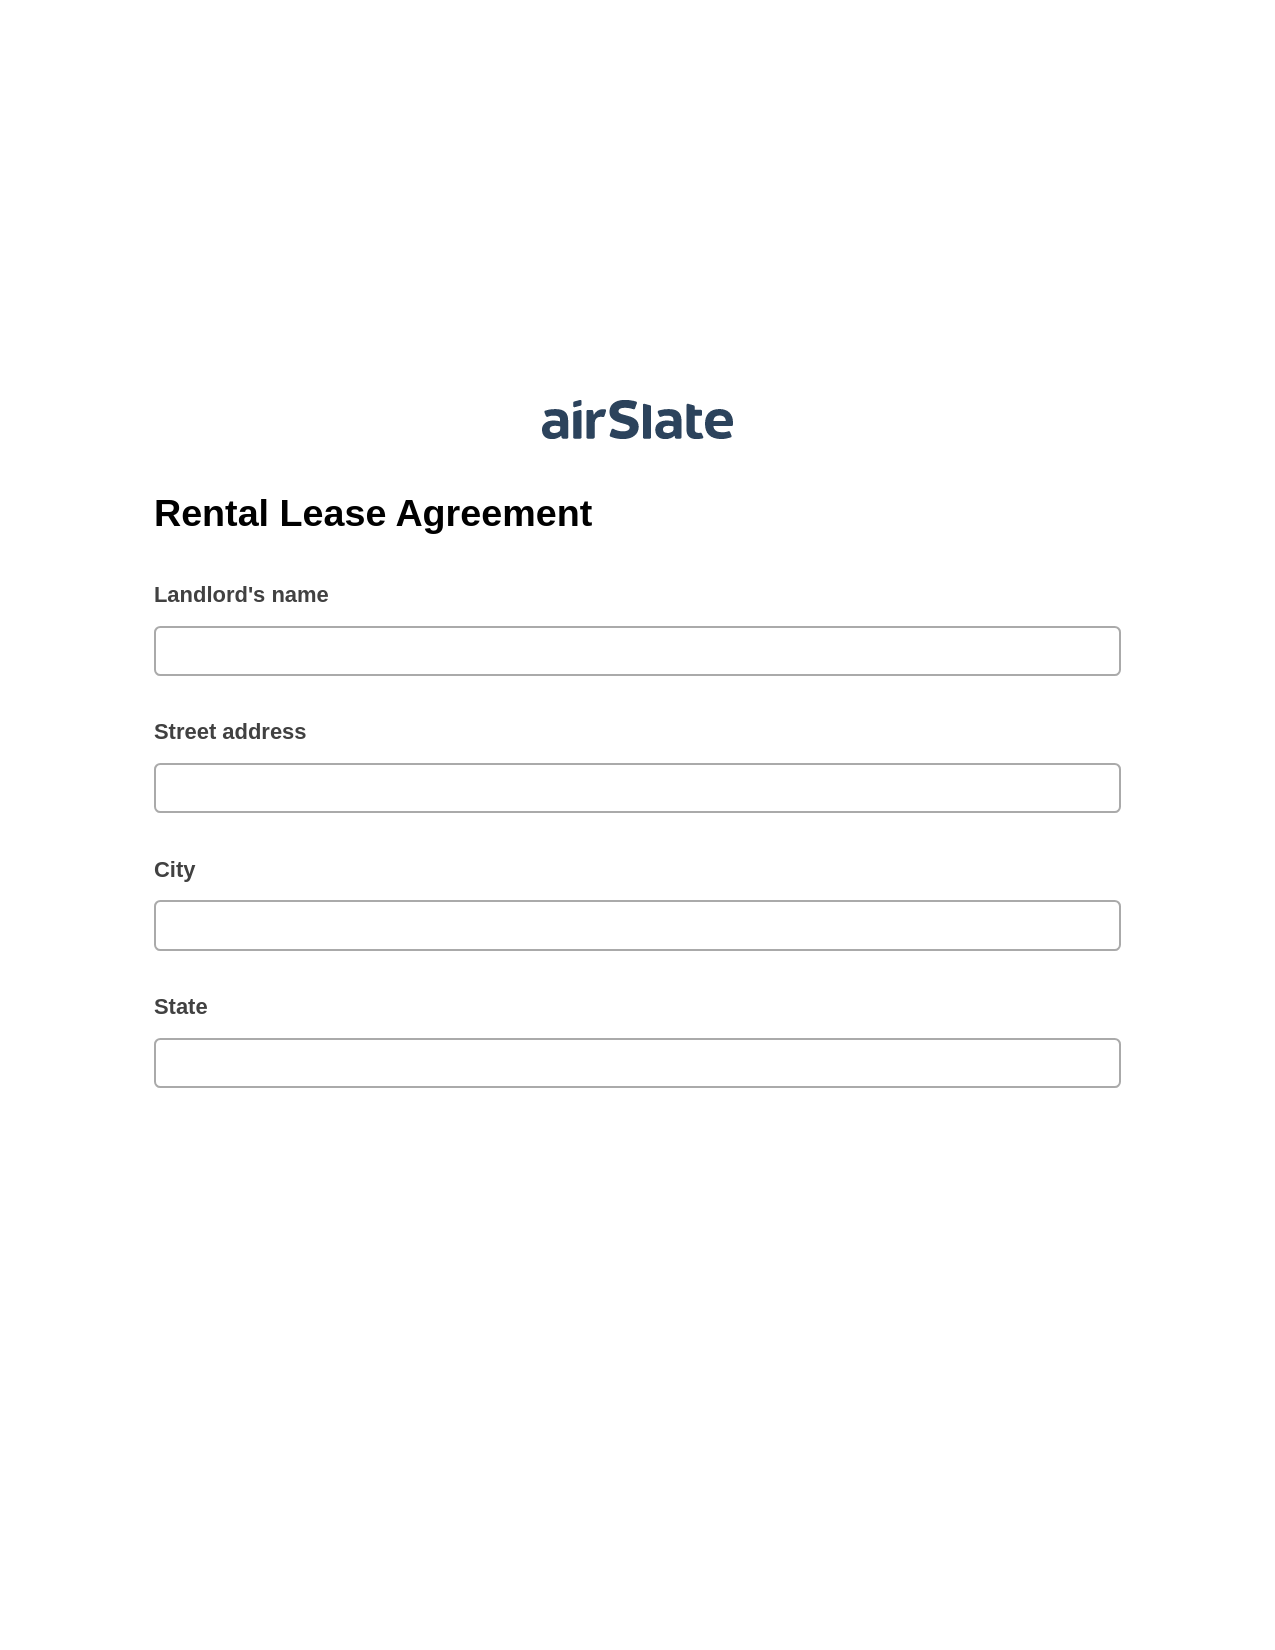 Rental Lease Agreement Pre-fill from Excel Spreadsheet Dropdown Options Bot, System Bot - Create a Slate in another Flow, Export to Formstack Documents Bot